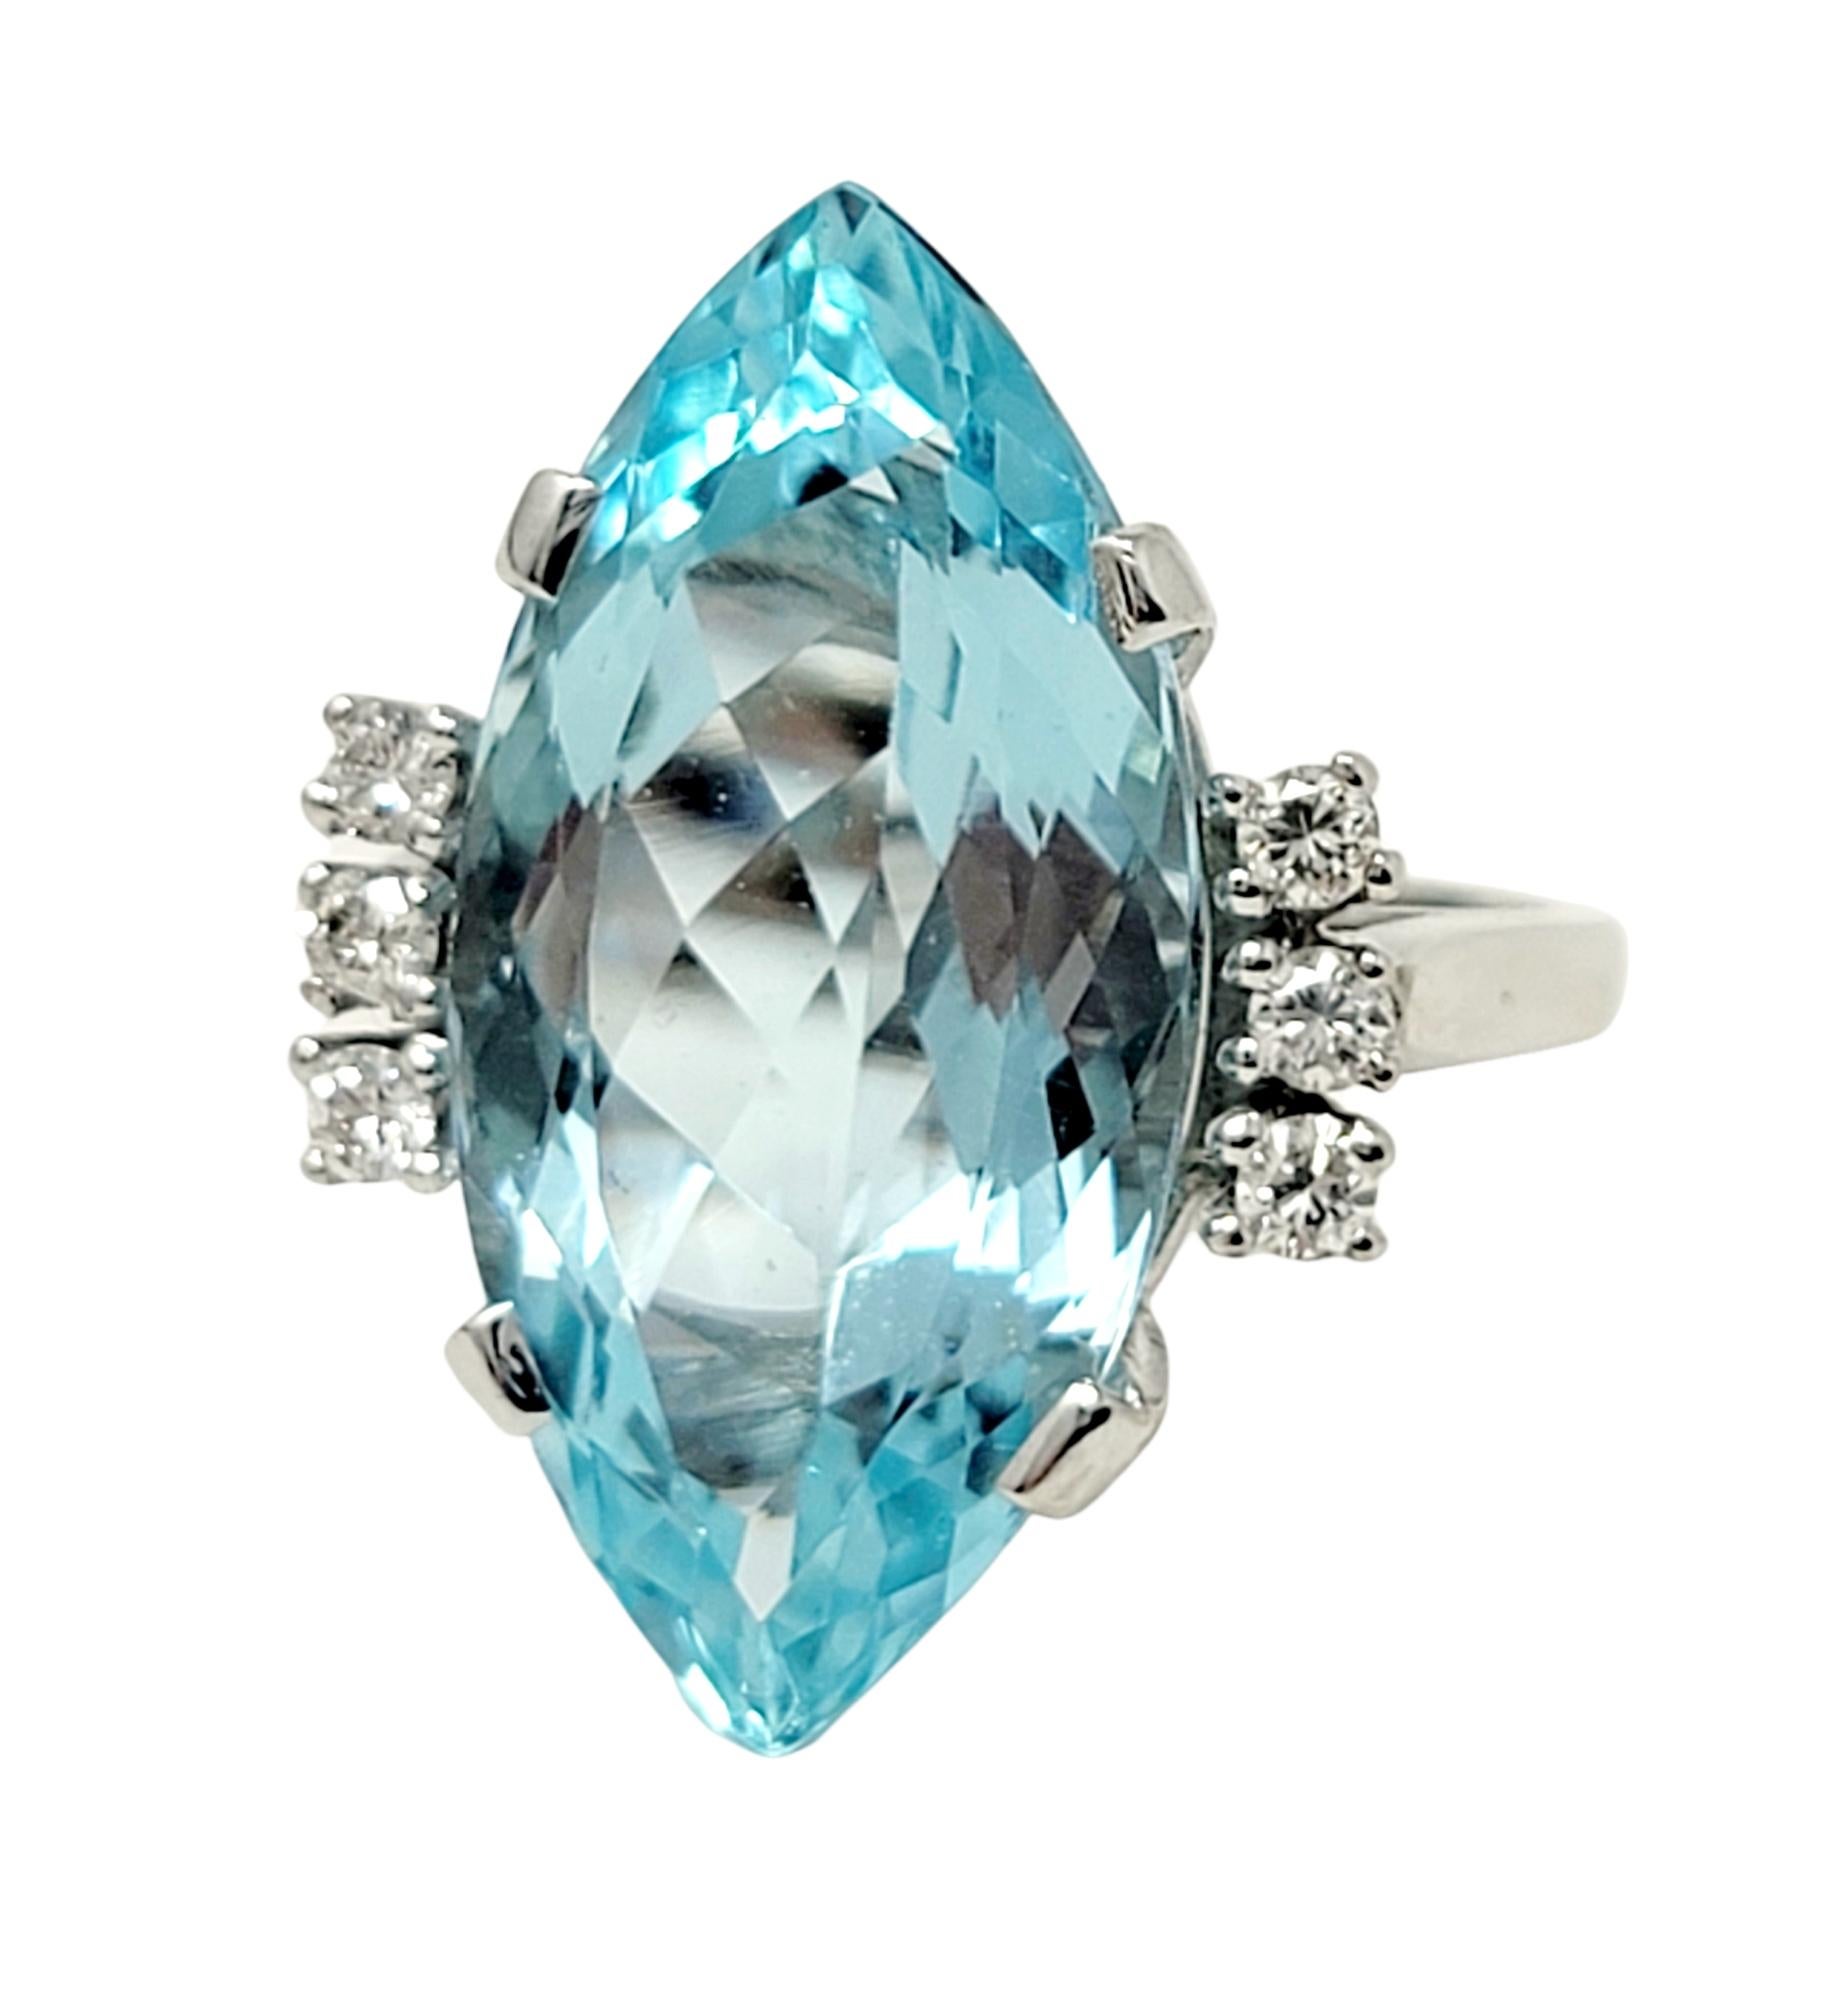 Ring size: 6.5

Stunning aquamarine and diamond cocktail ring. This eye-catching piece makes a bold statement with both its impressive size and exquisite color. The incredible marquis cut aquamarine stone is 4 prong set in 14 karat white gold and